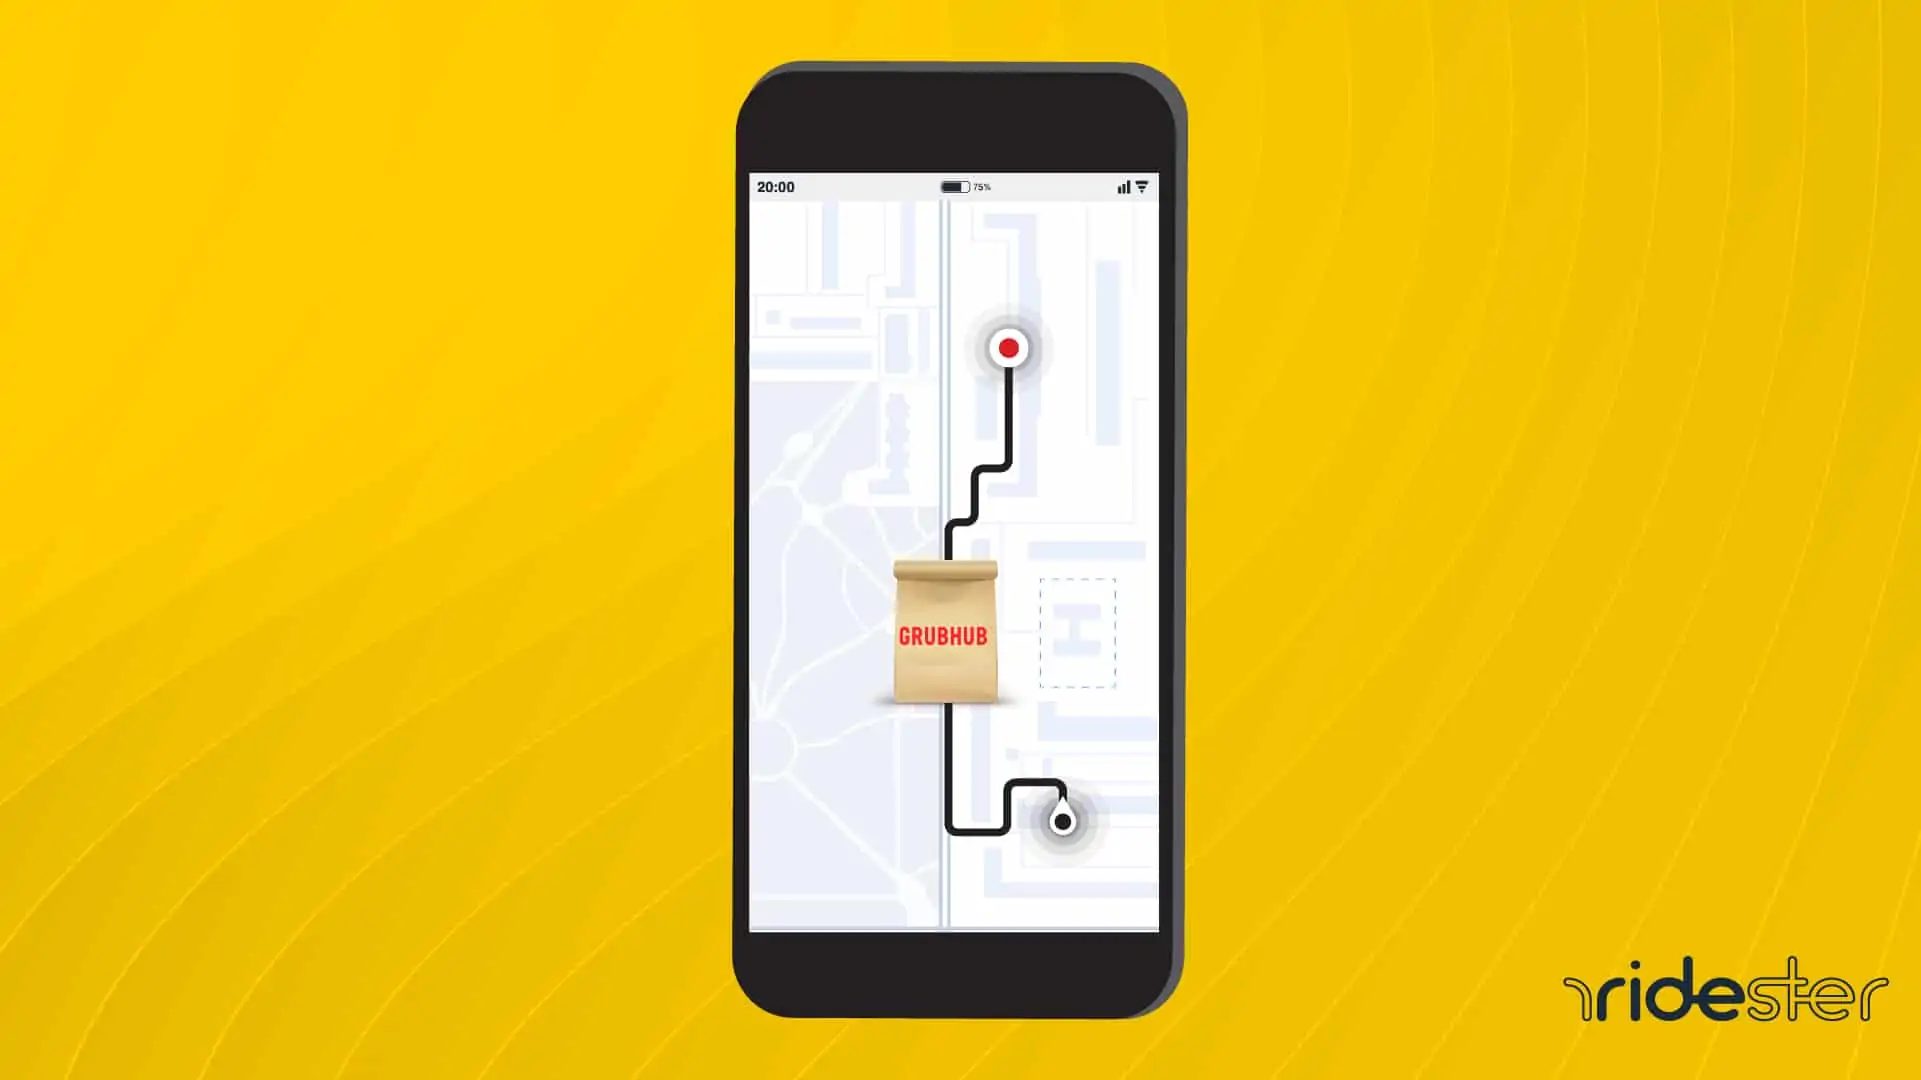 vector graphic showing a smartphone on a map tracking a food order for the how far does grubhub deliver post on ridester.com